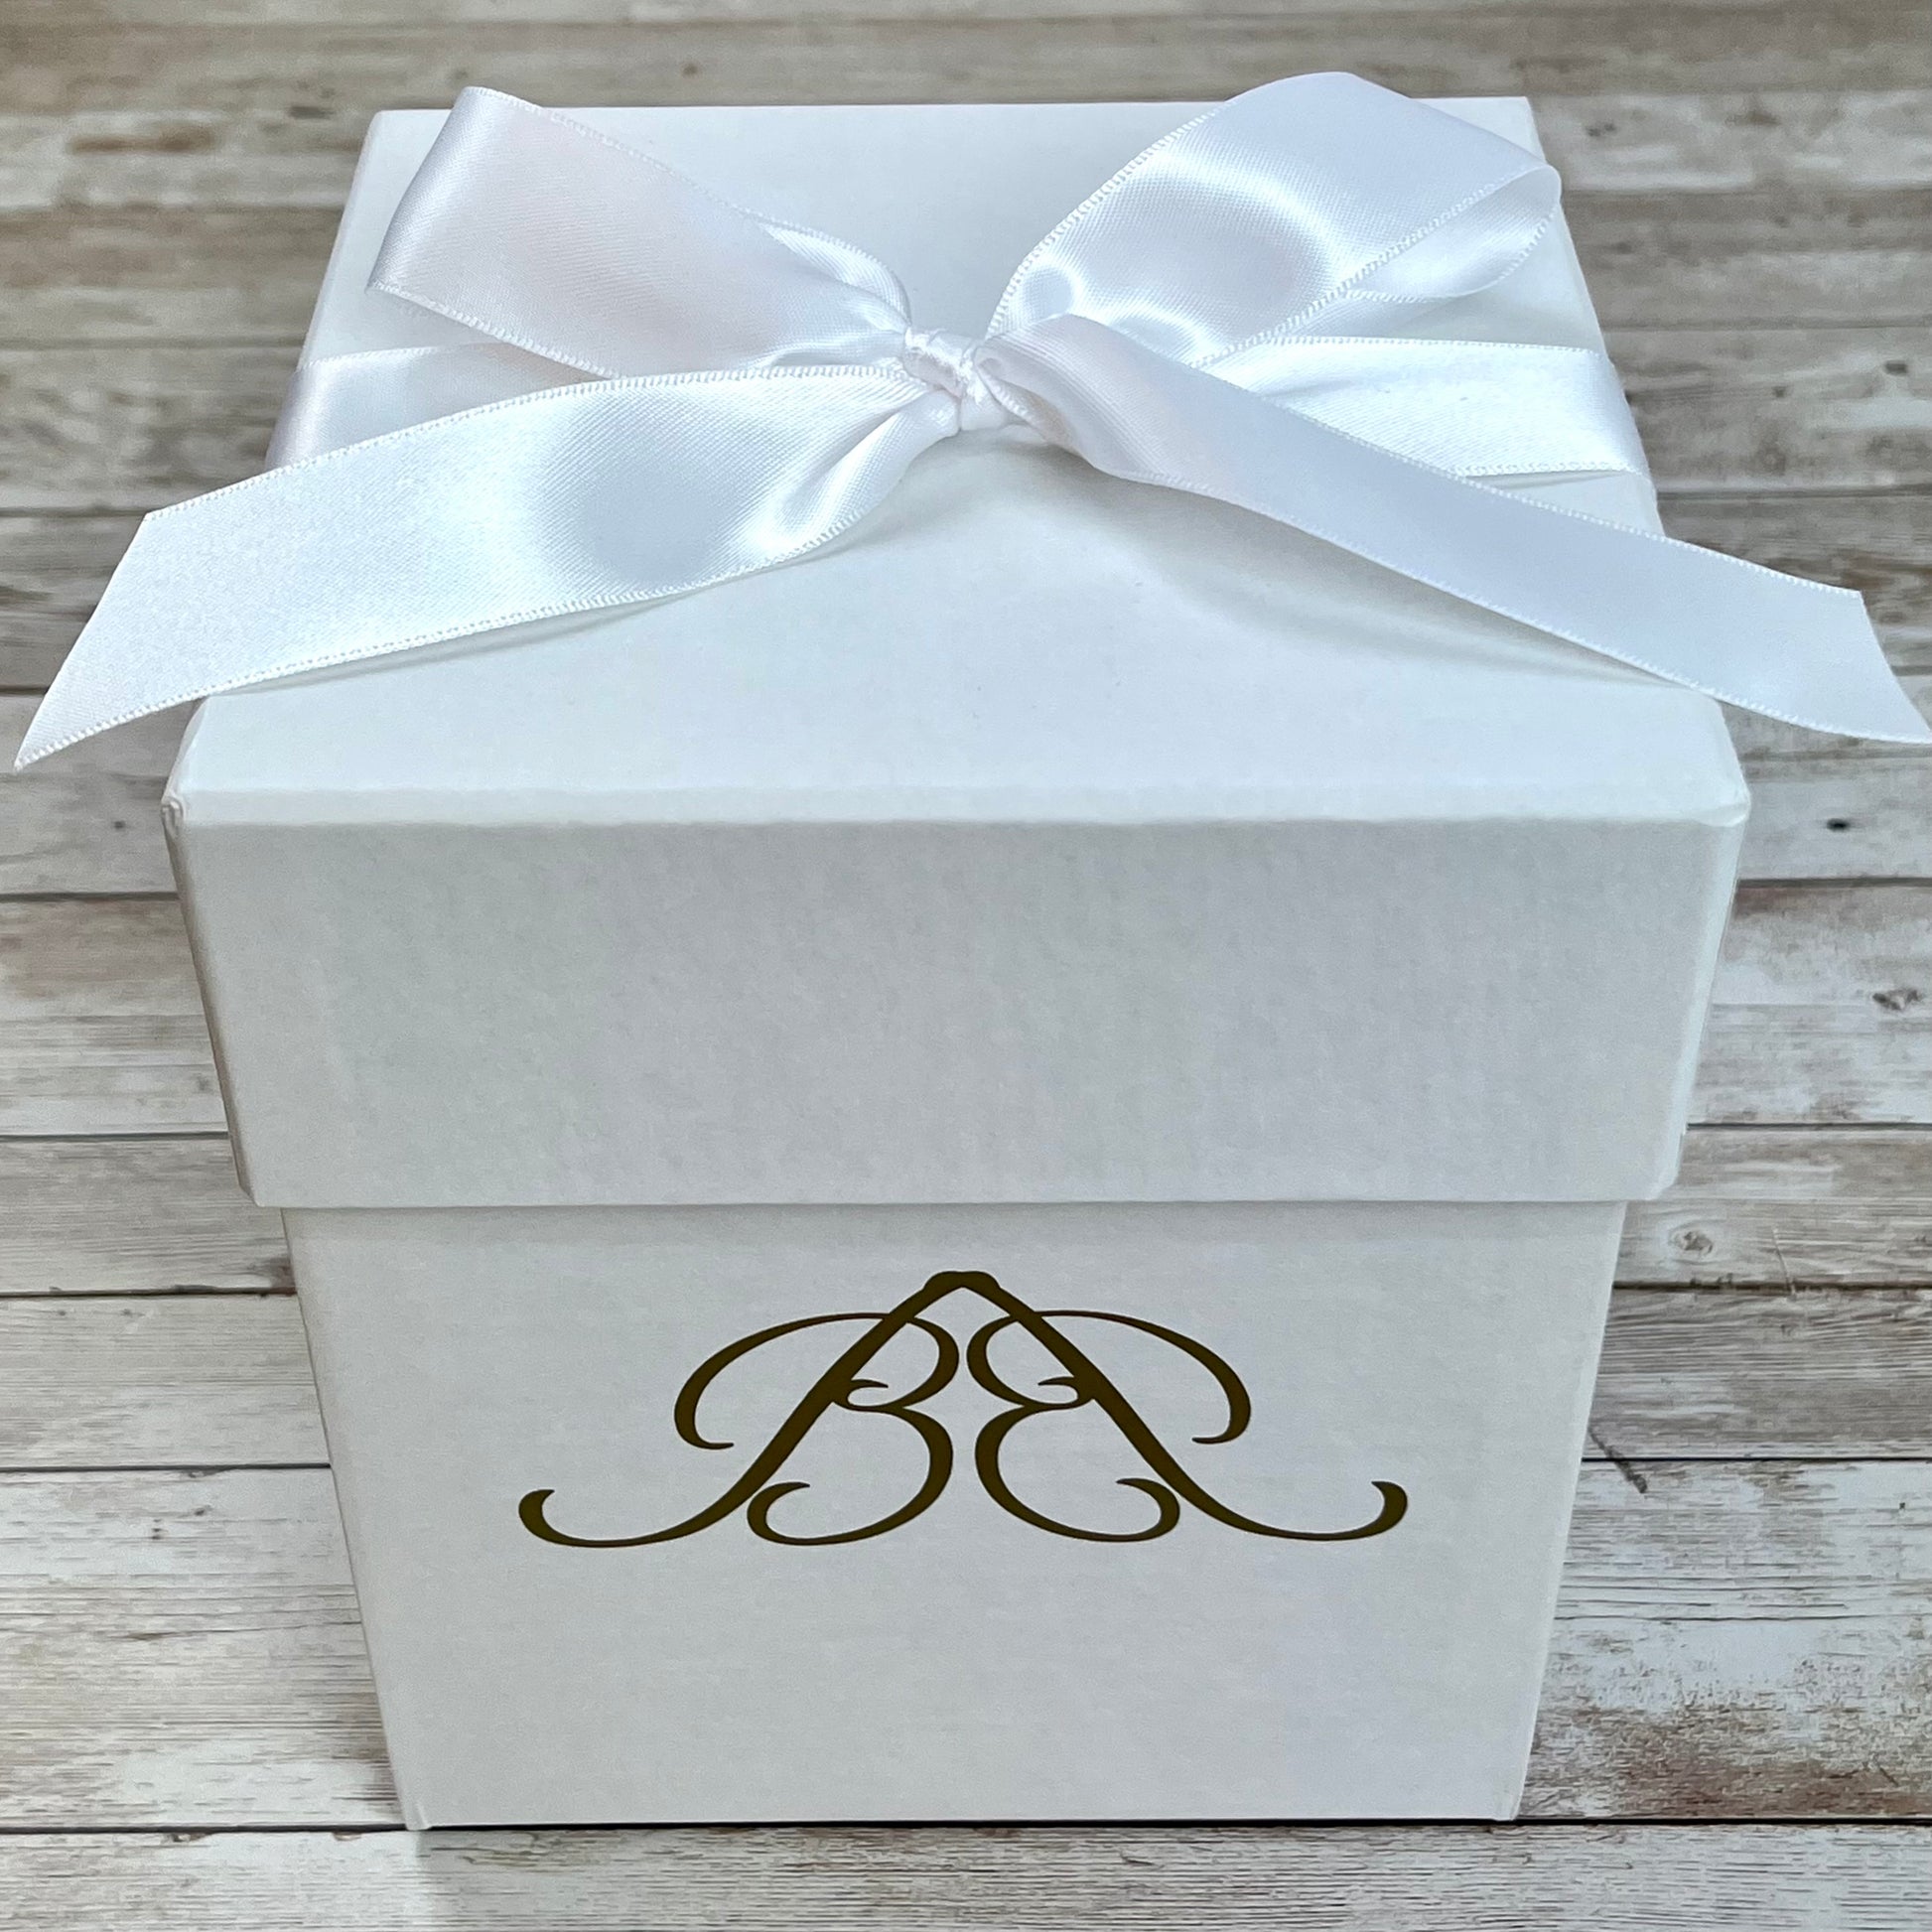 White Square Infinity Rose Box - Infinity Roses